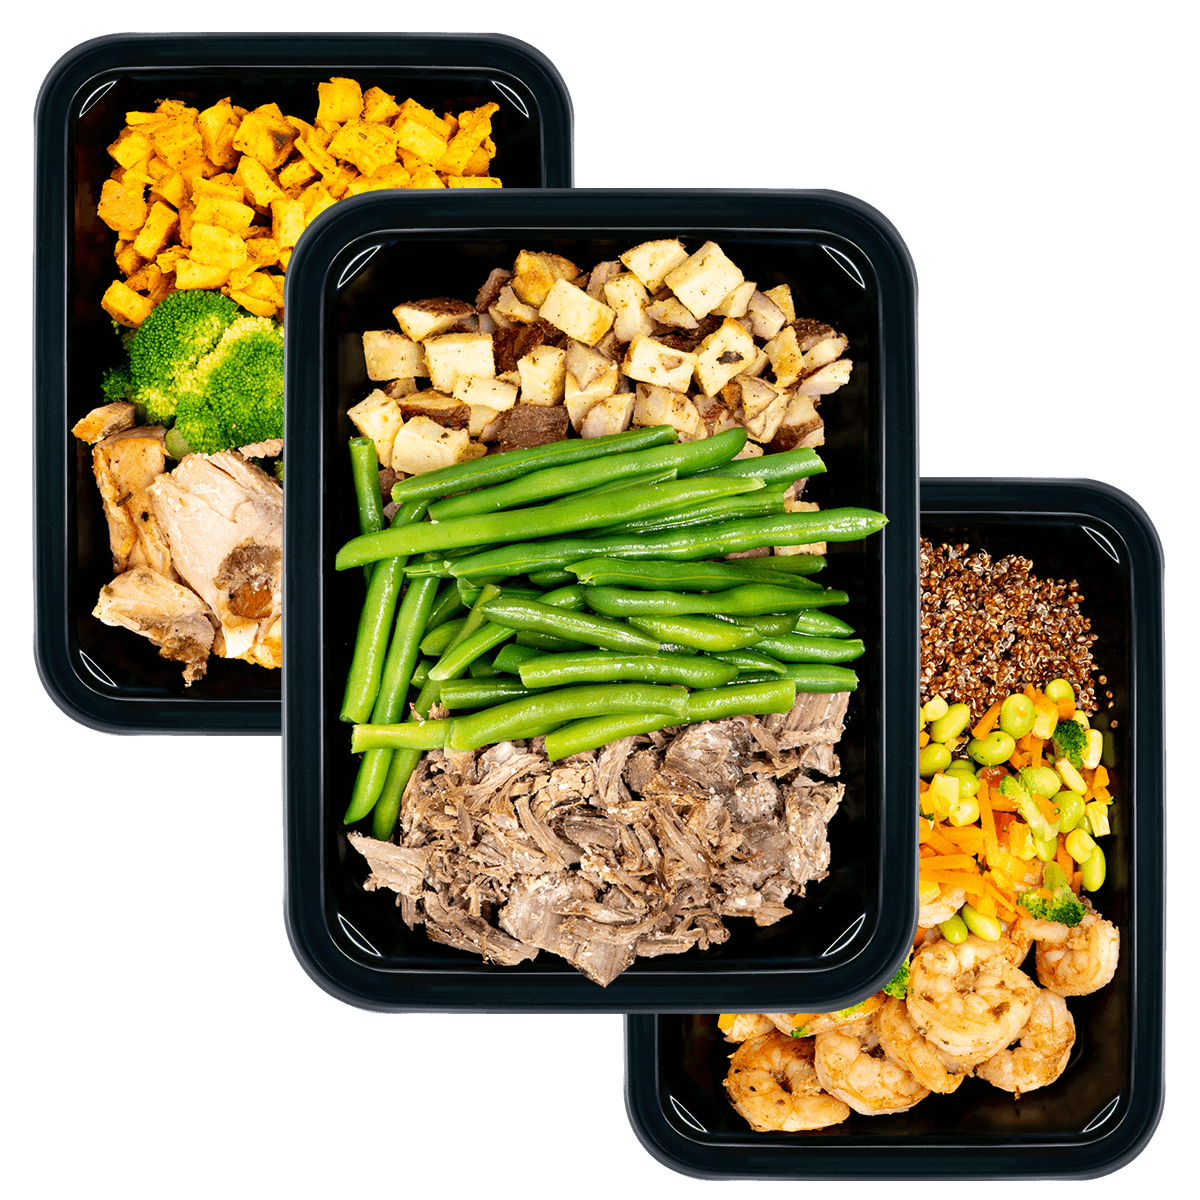 Custom Meal – ICON Meals